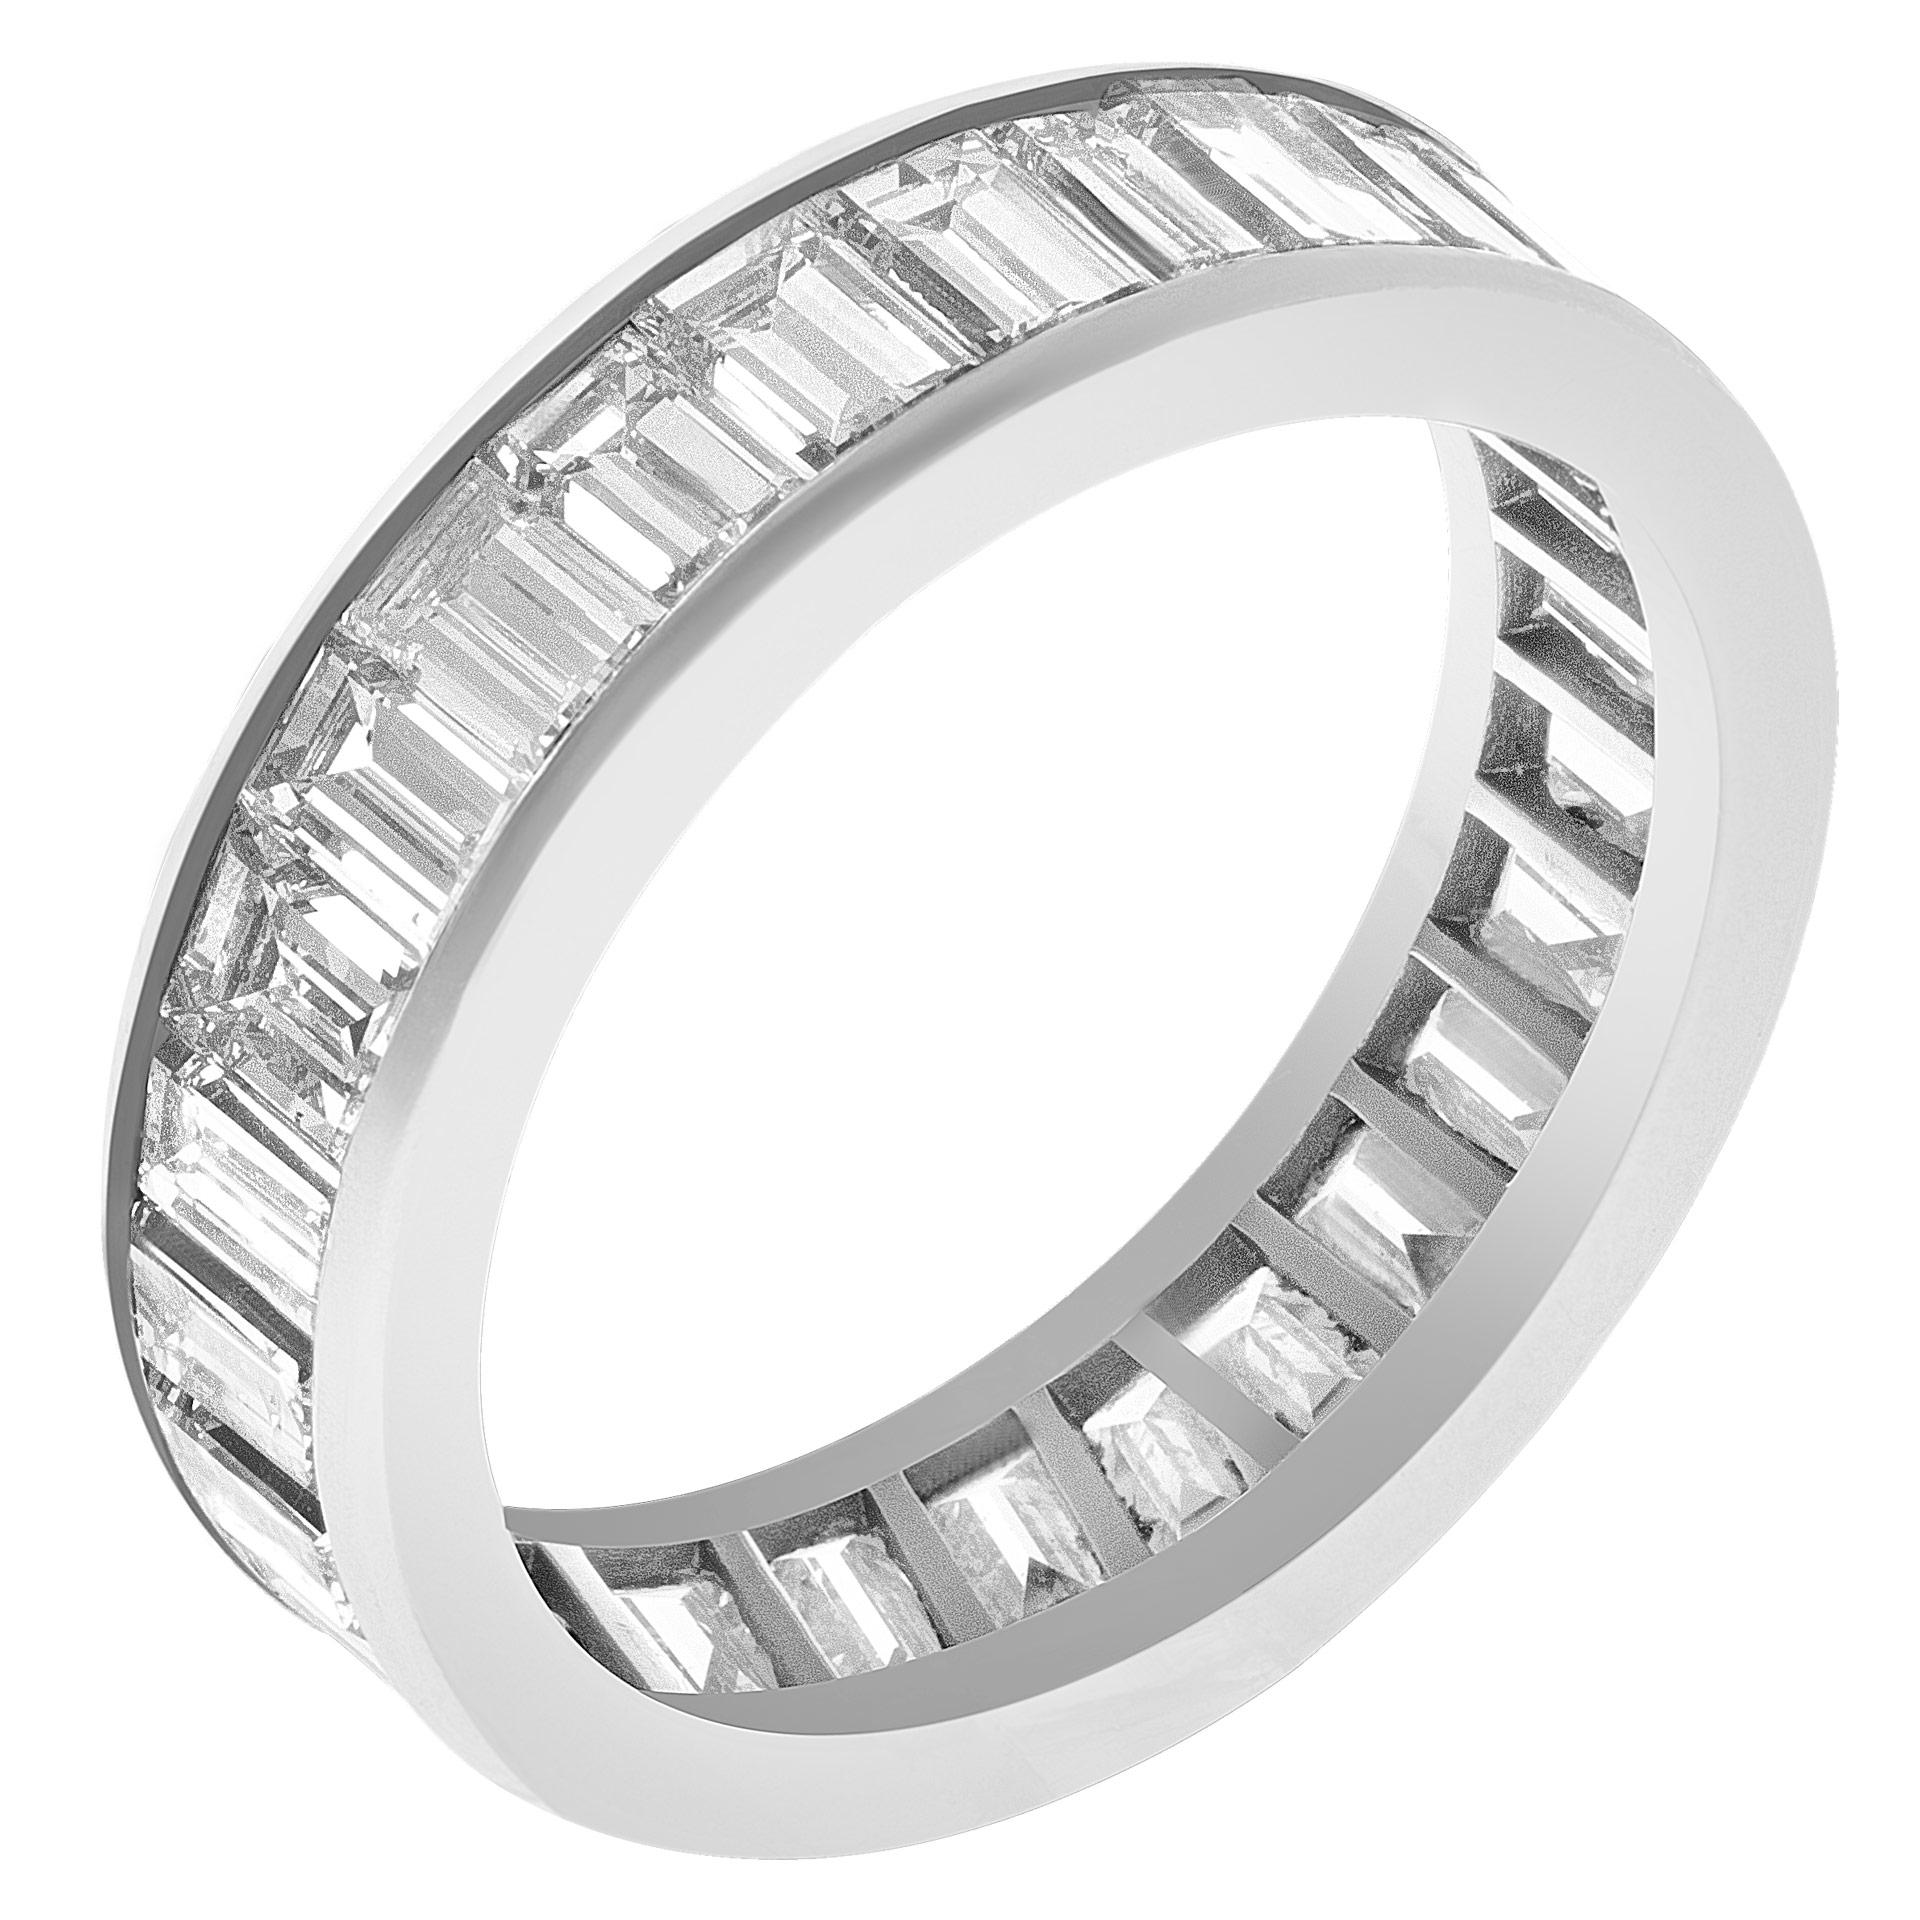 Diamond eternity band with approximately 5.50 carats in baguette G-H color, VS2-SI1 clarity diamonds all set in platinum. Size 9.
